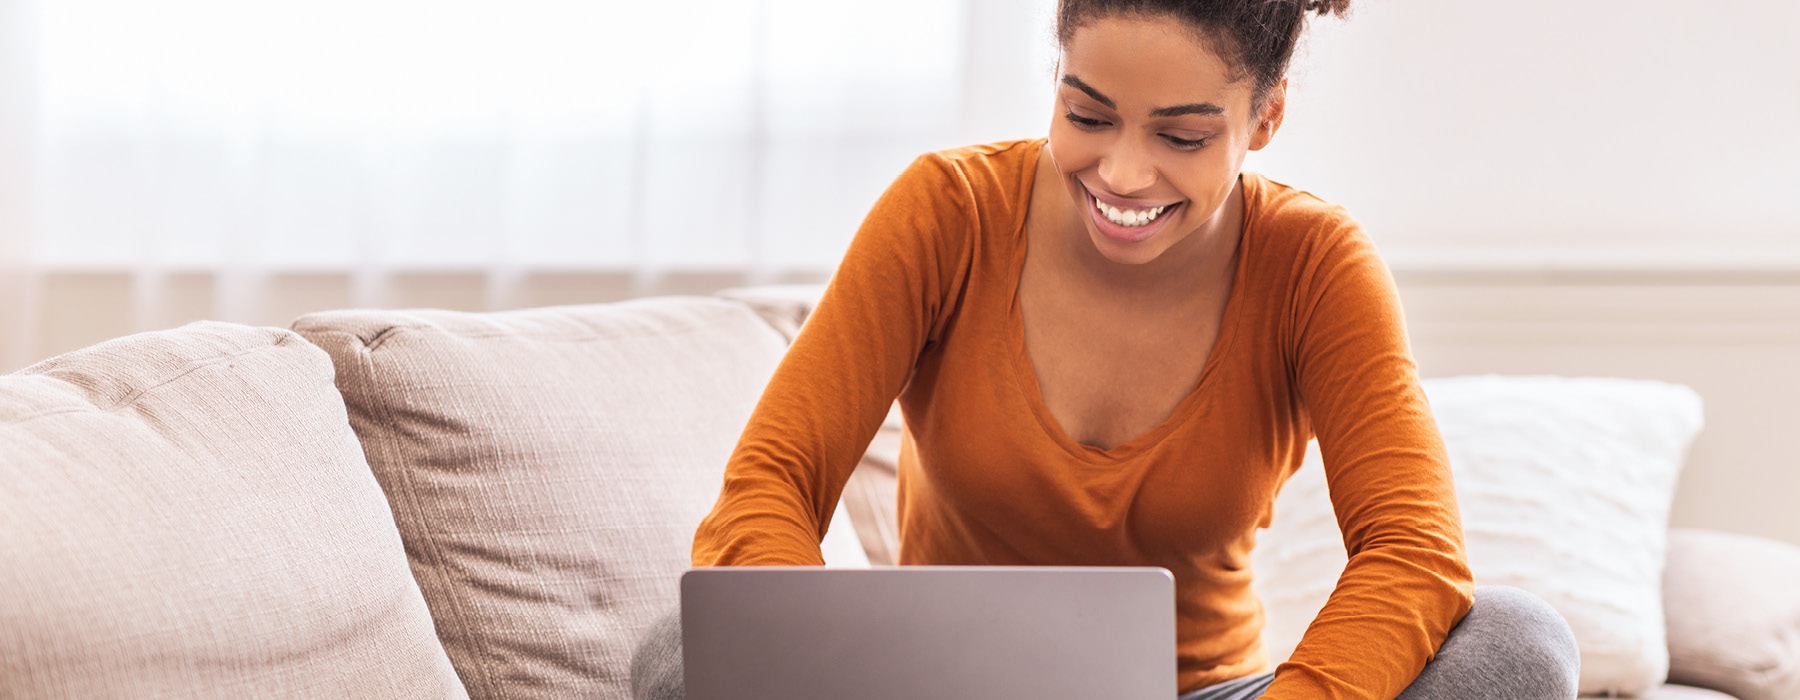 smiling woman sits on her couch and works on her laptop